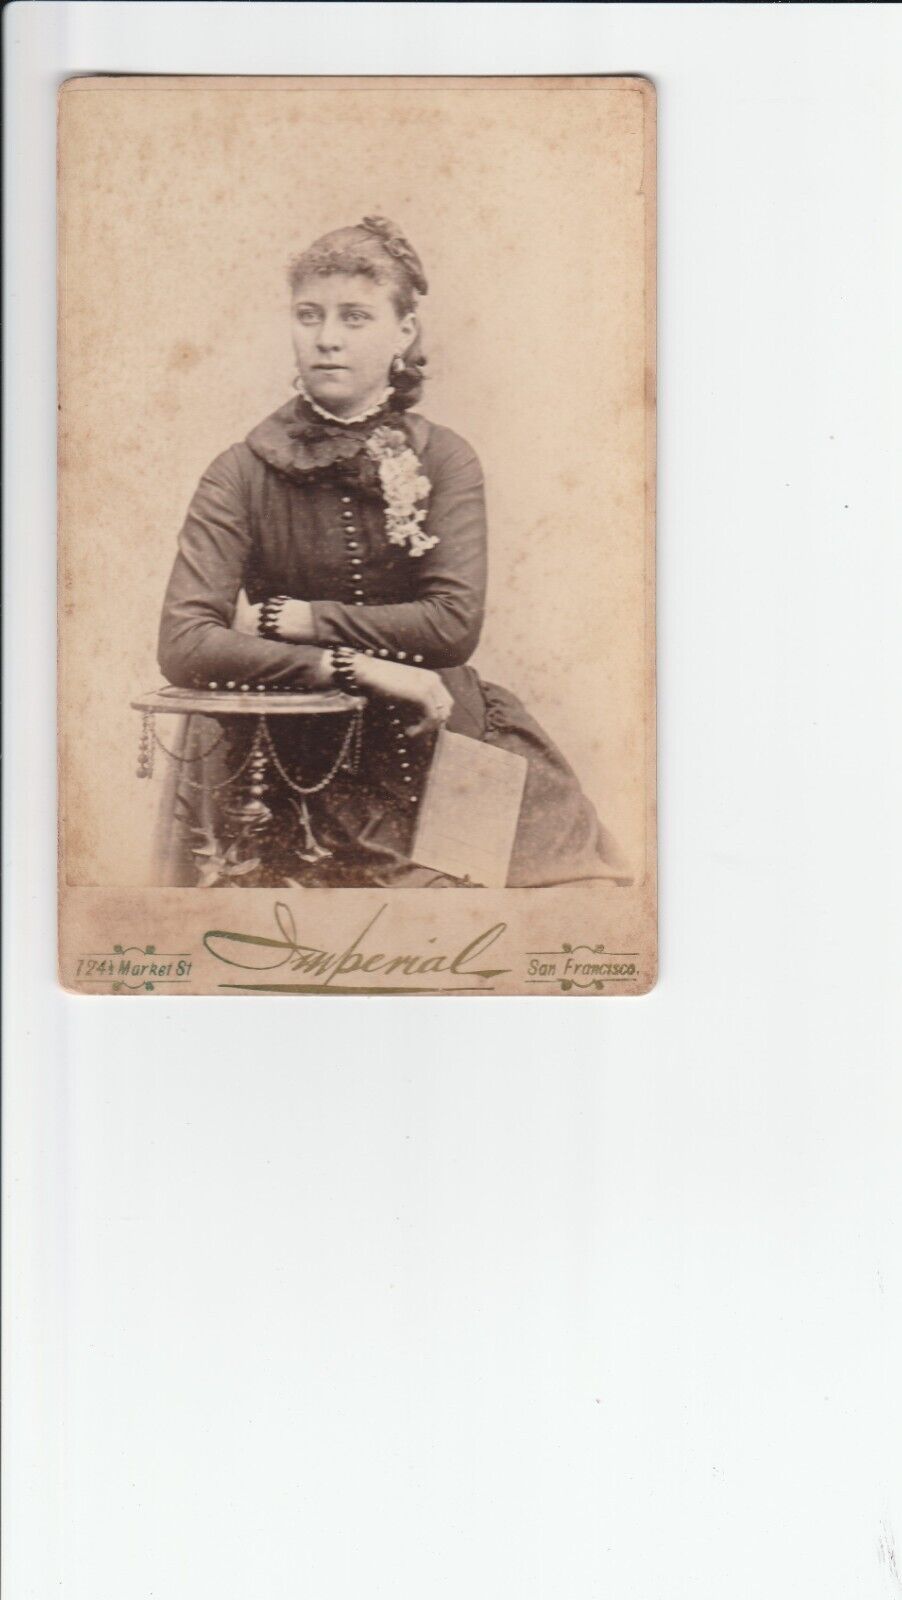 Cabinet Card 1877 S.F. CA,VICTORIAN LADY FLOWER CORSAGE,CURLY HAIR,JEWELRY, BOOK